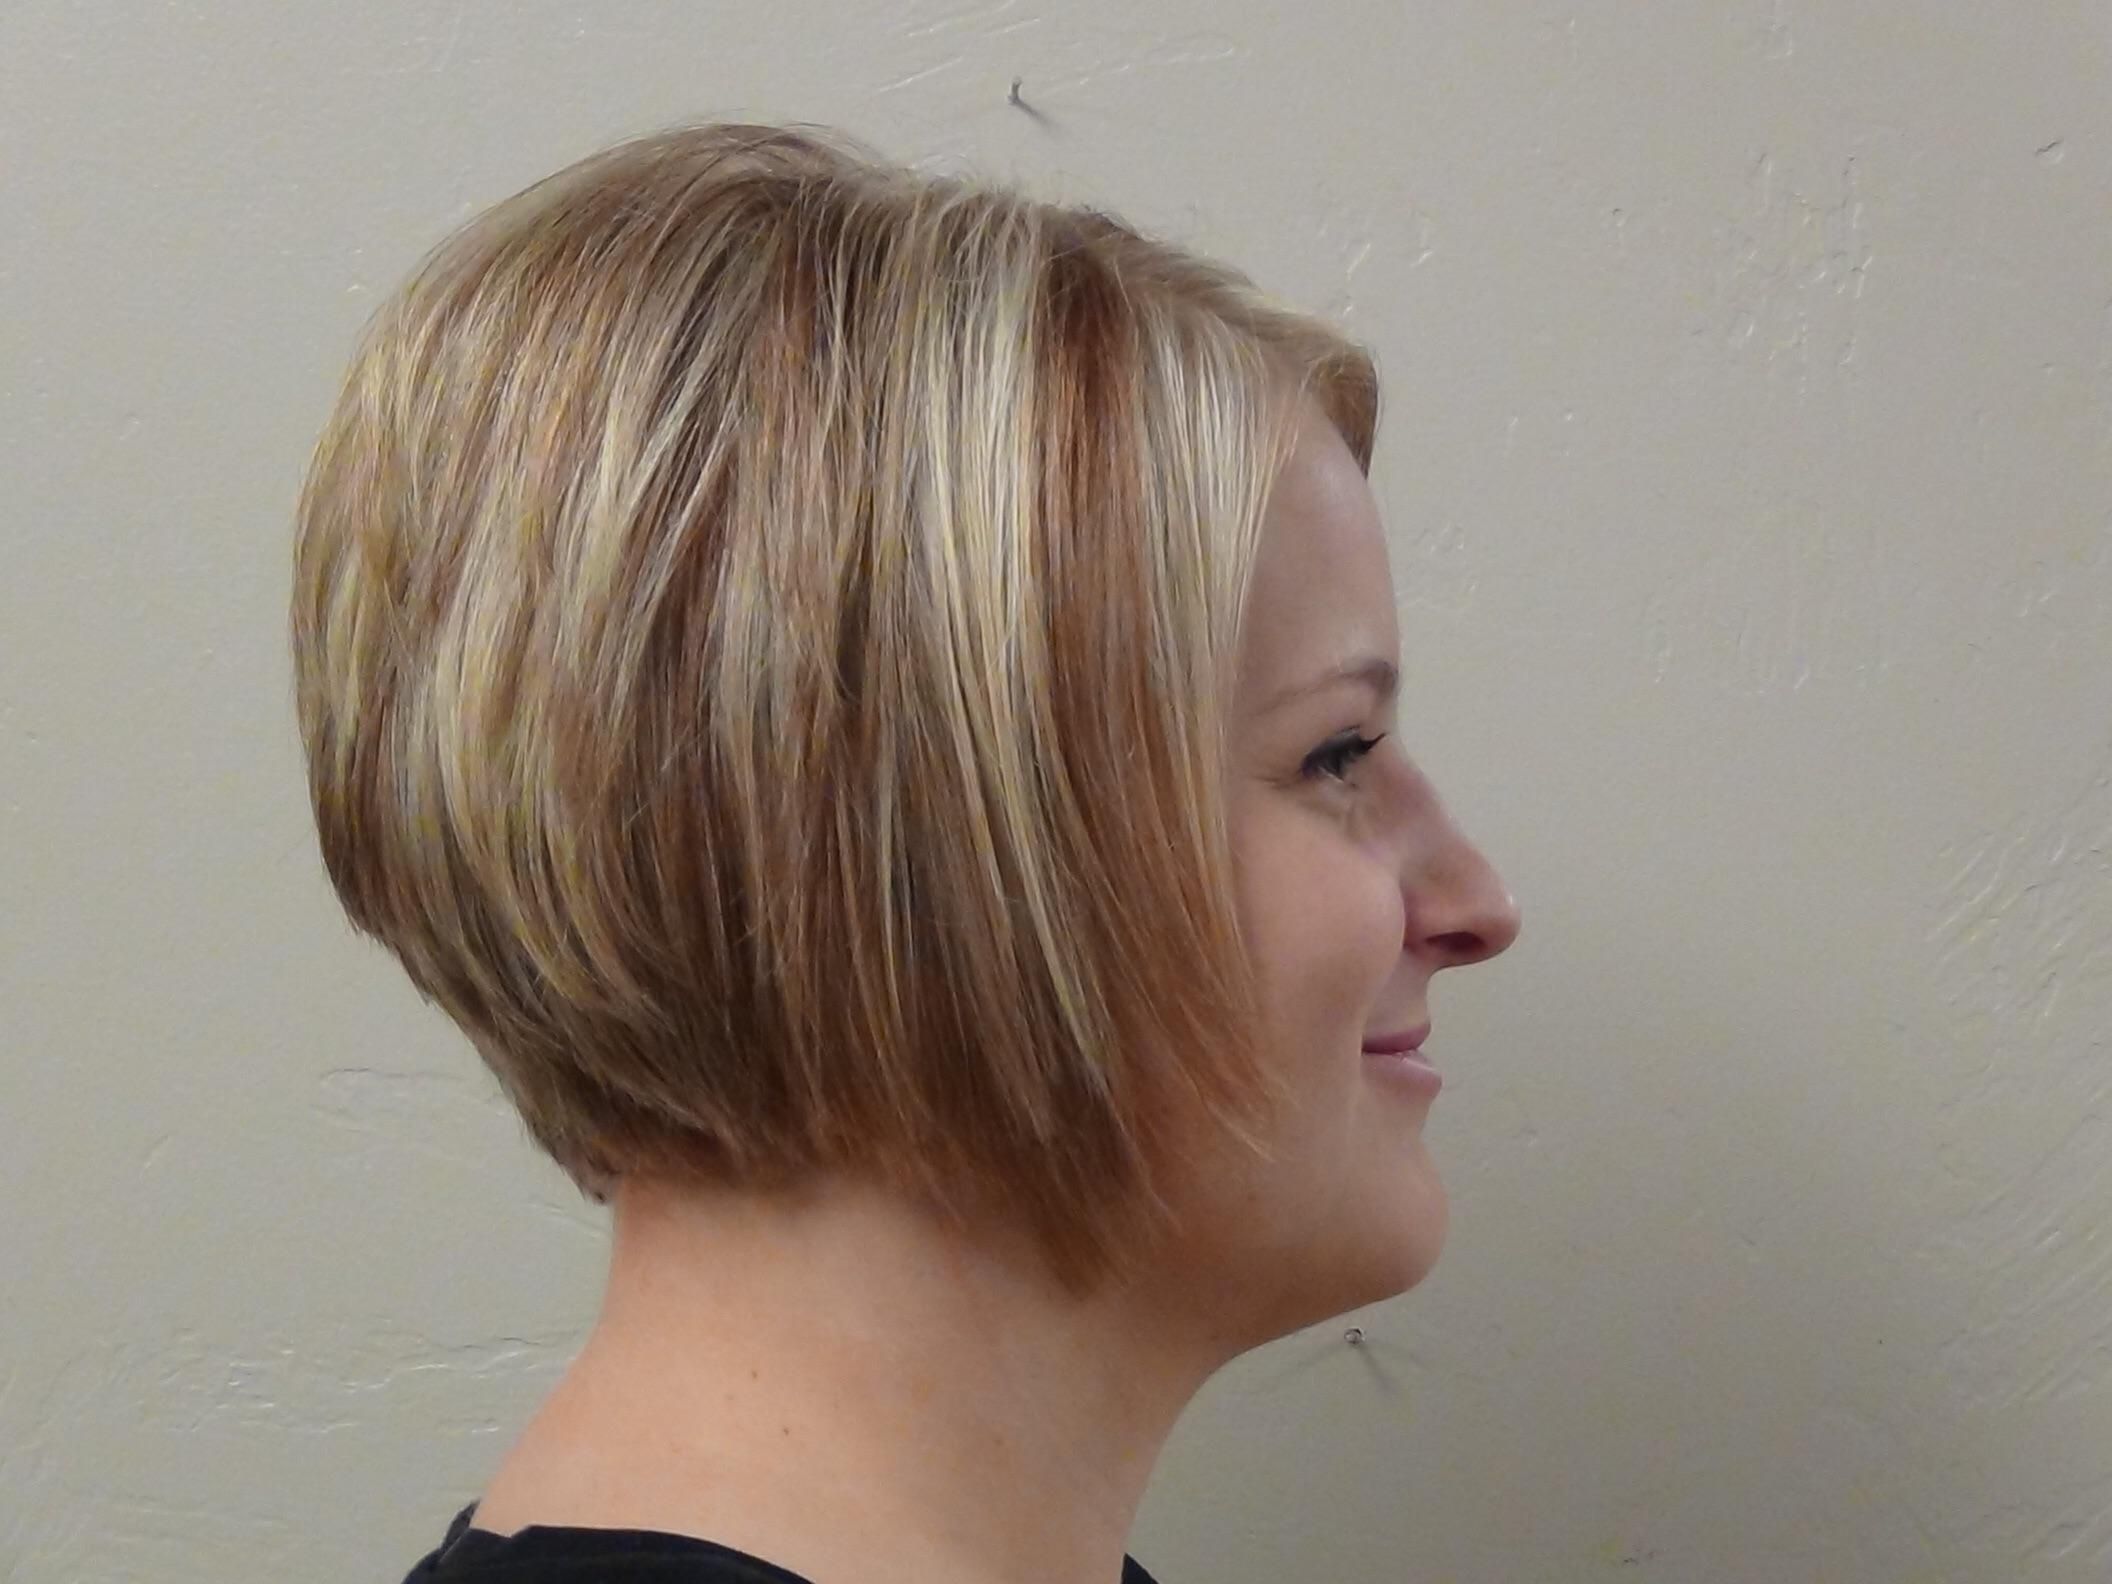 My wife just got this style haircut. Should I tell her or have her speak to a manager?